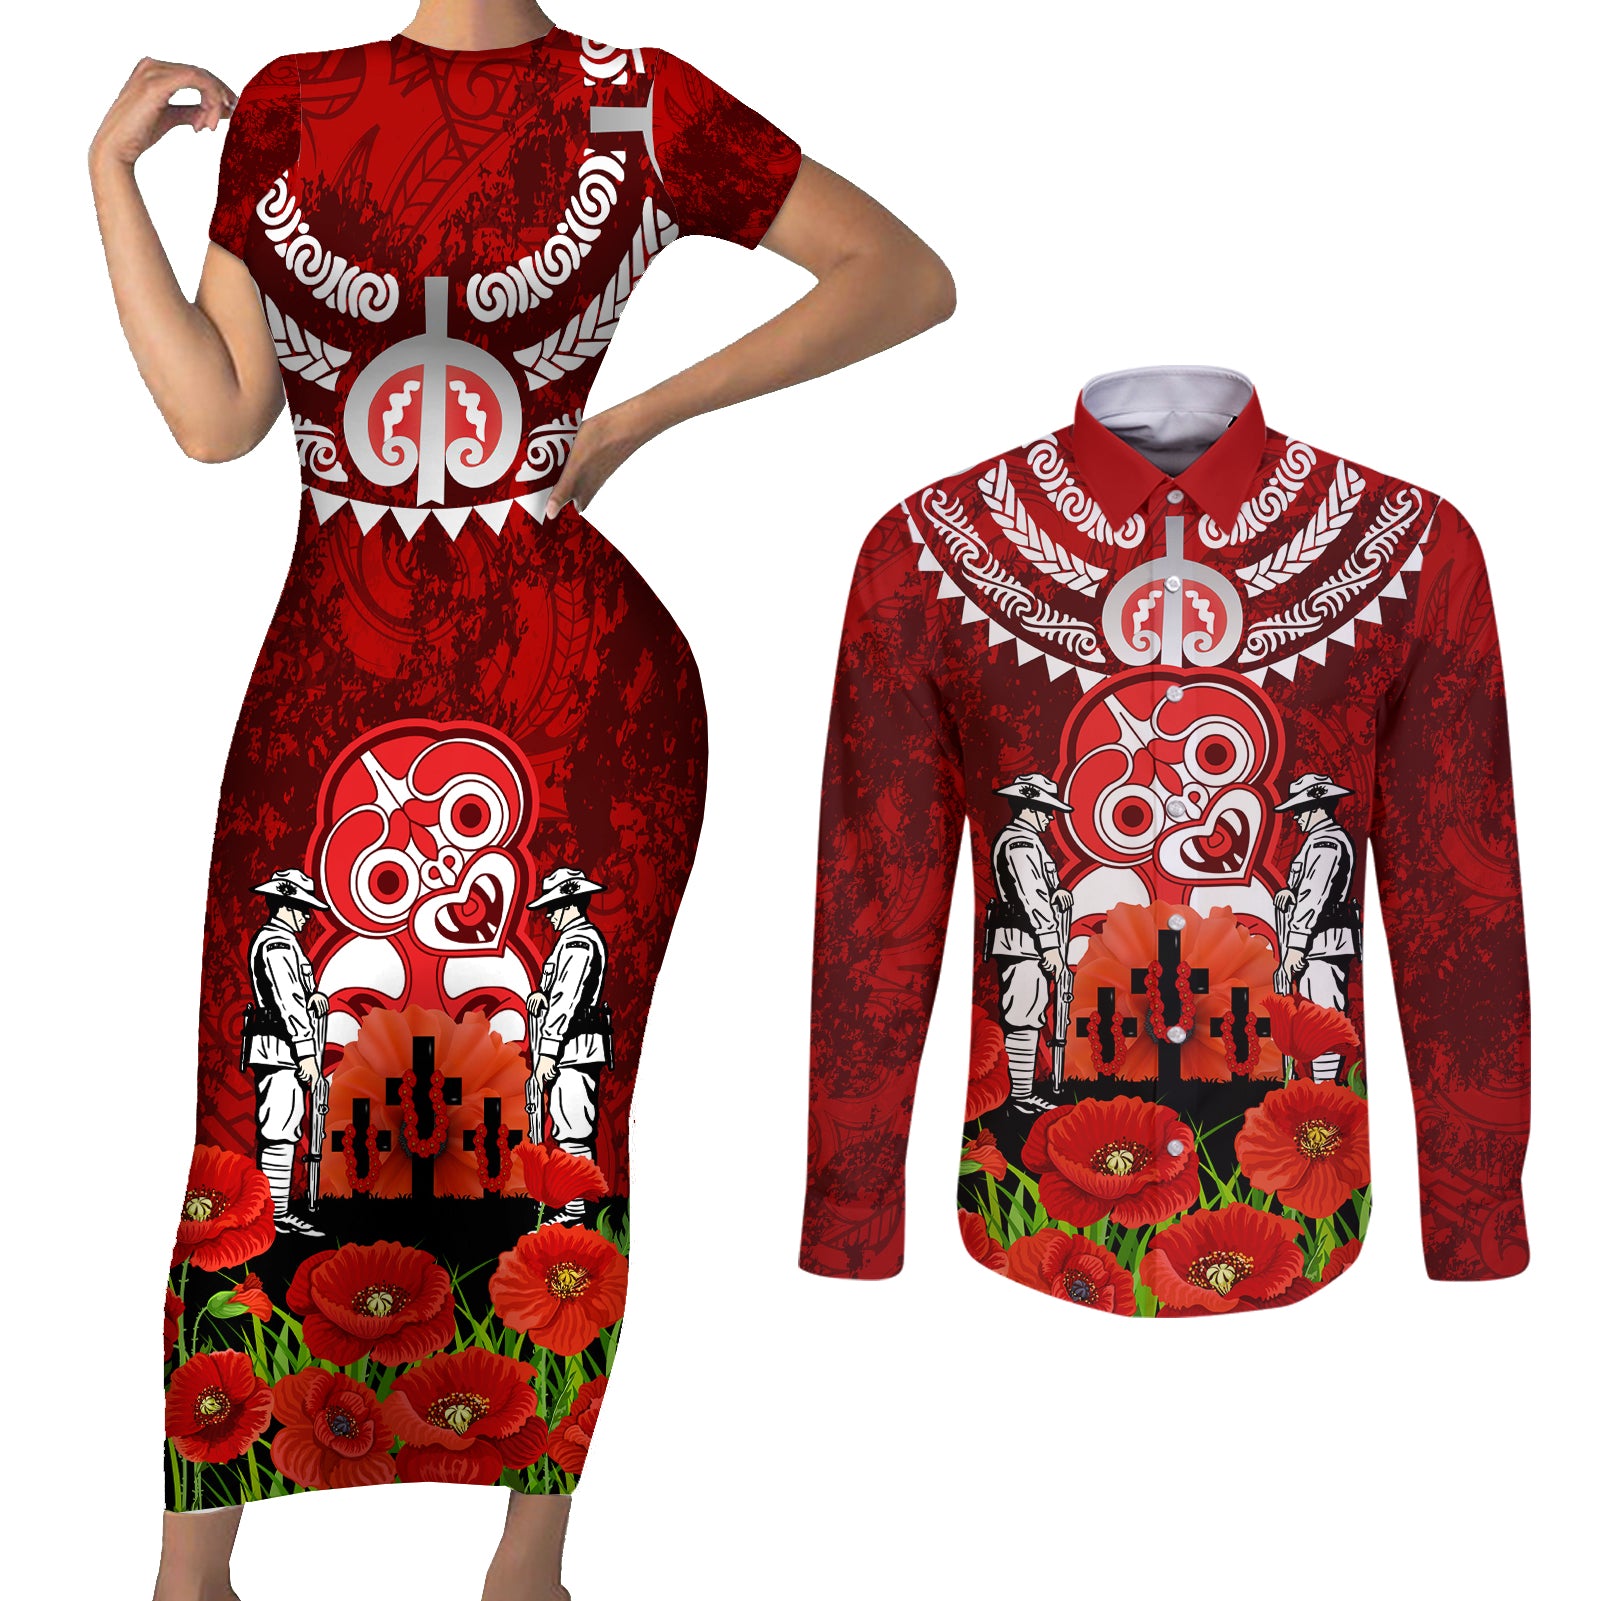 New Zealand ANZAC Waitangi Day Couples Matching Short Sleeve Bodycon Dress and Long Sleeve Button Shirt Hei Tiki and Soldier LT03 Red - Polynesian Pride